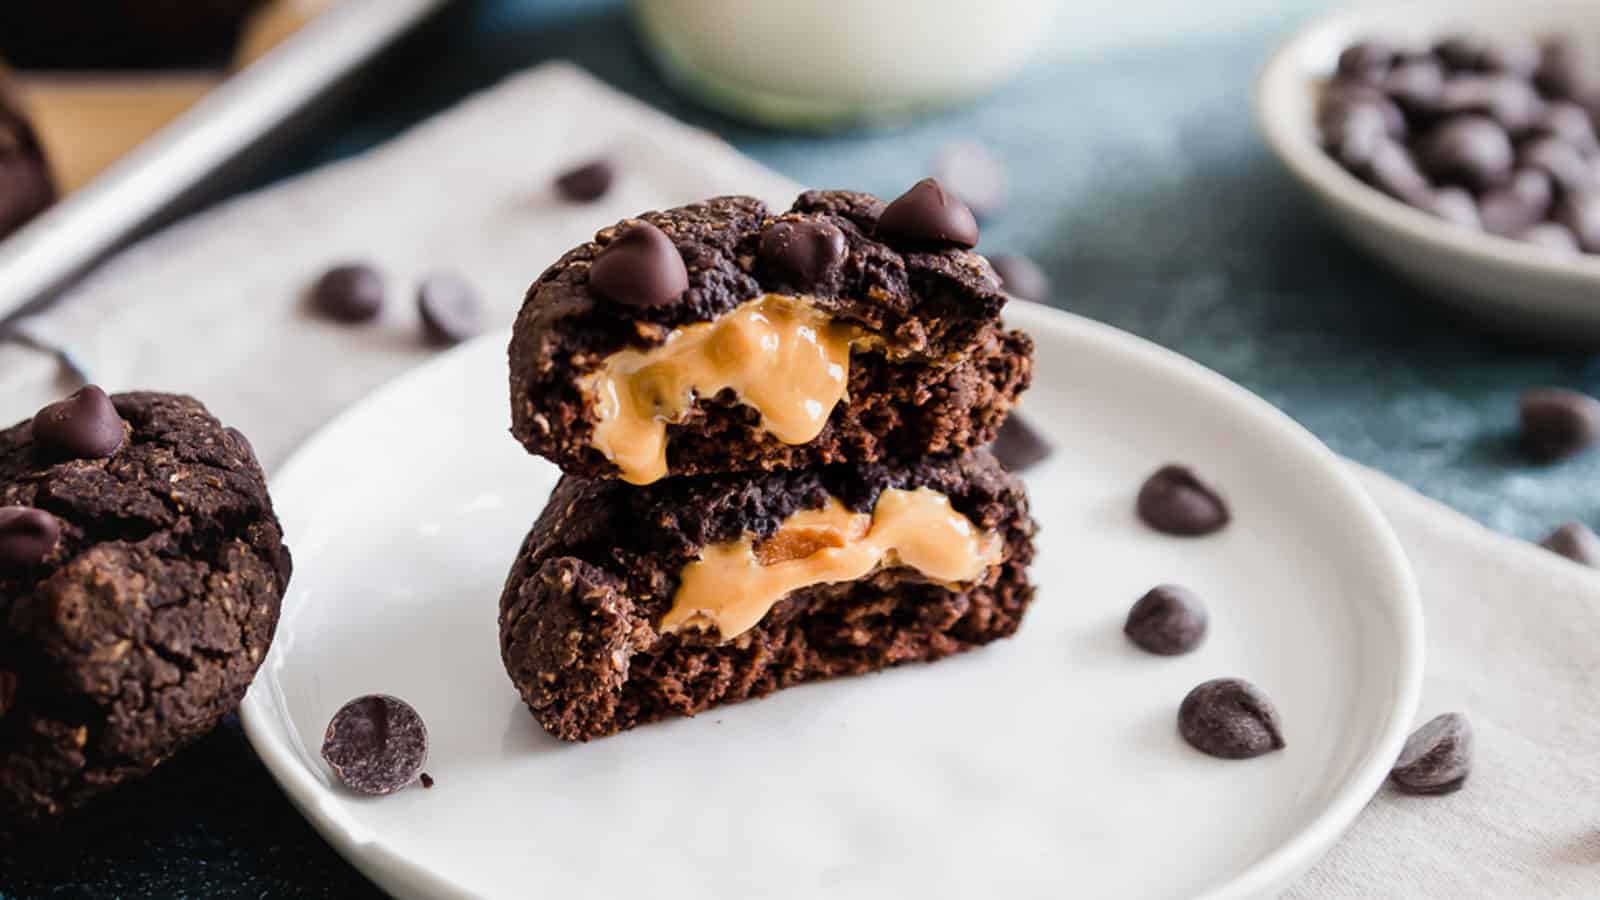 Peanut butter stuffed chocolate cookies stacked on a white plate.